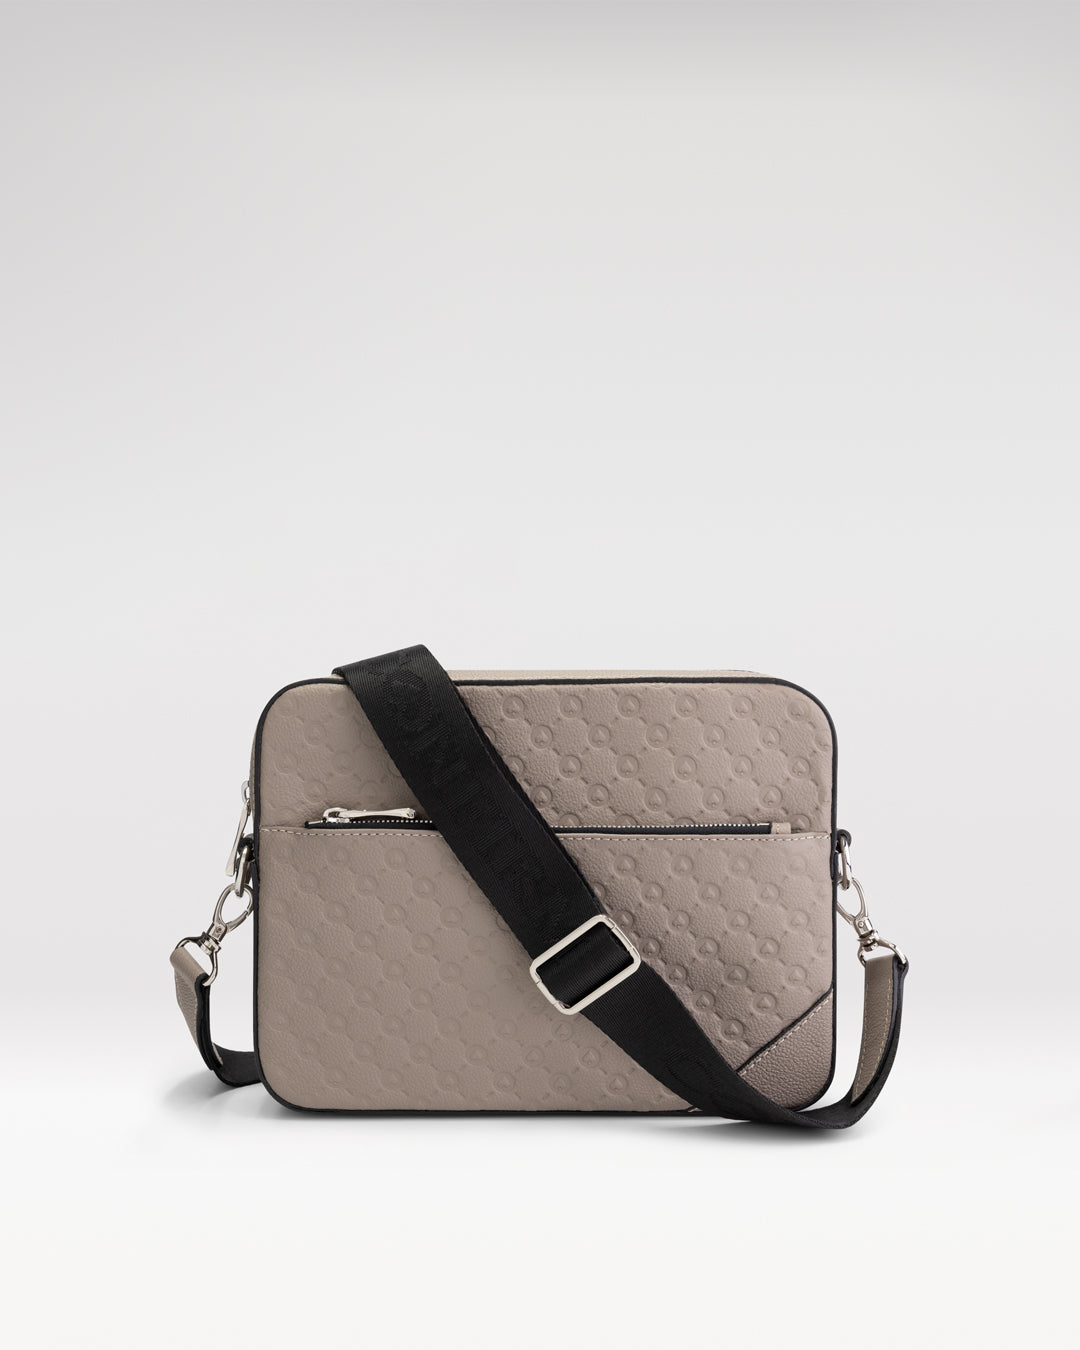 Duo bag patterned | taupe